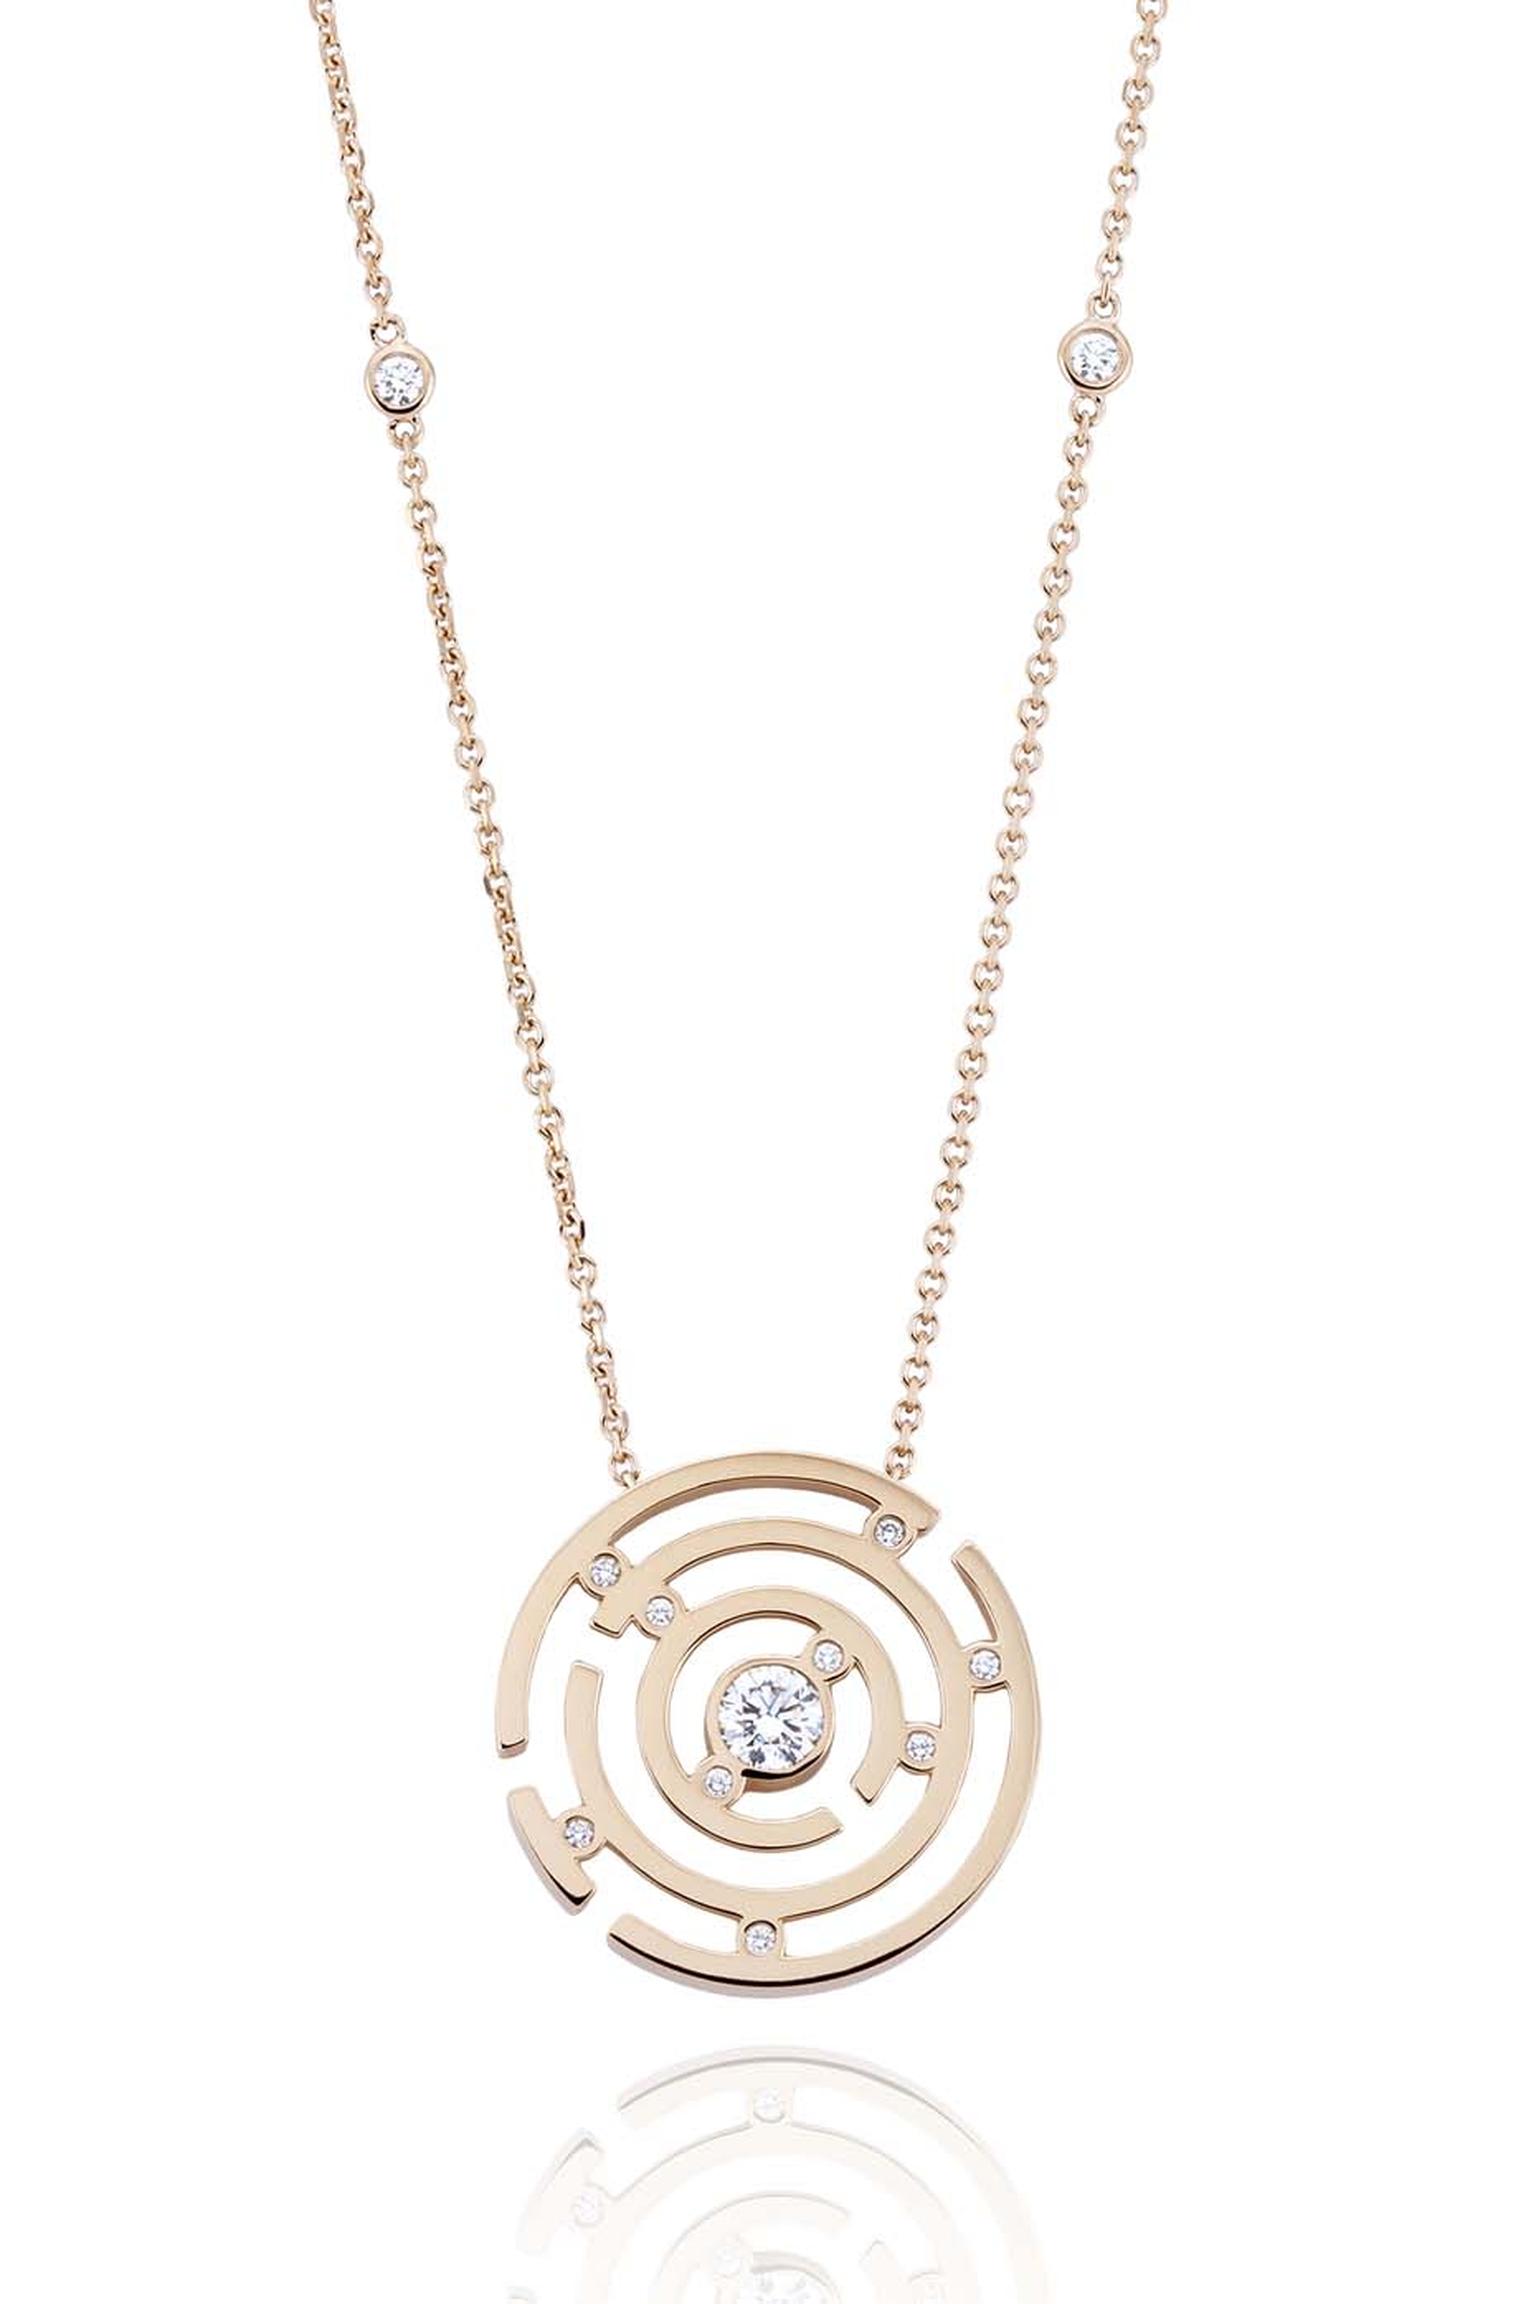 Boodles Maze diamond and rose gold necklace (£5,000).